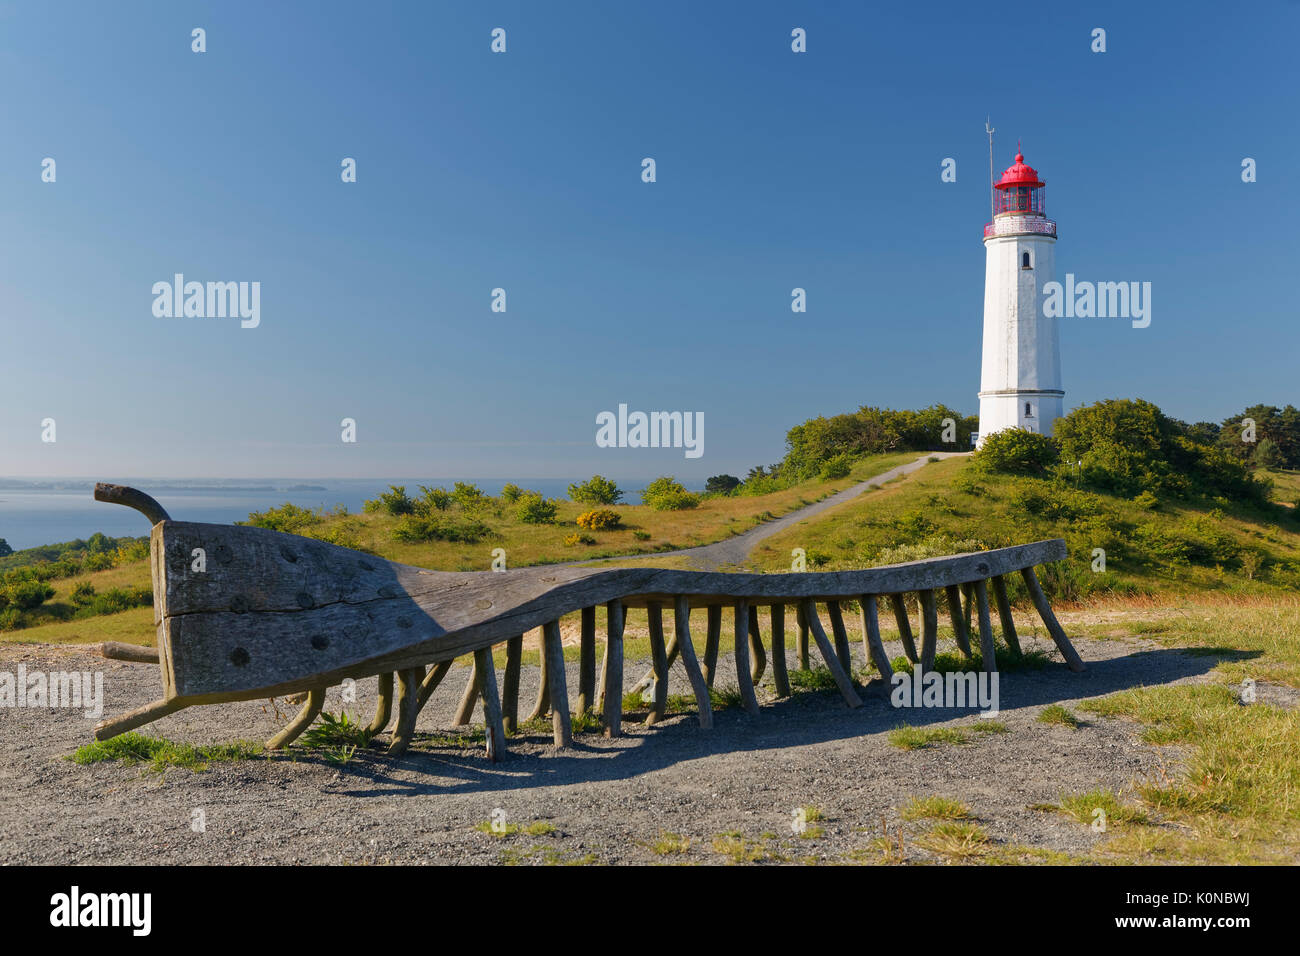 Germany, Mecklenburg-Western Pomerania, Hiddensee, Dornbusch lighthouse on the Schluckswiek, with old twisted wood bench in foreground Stock Photo